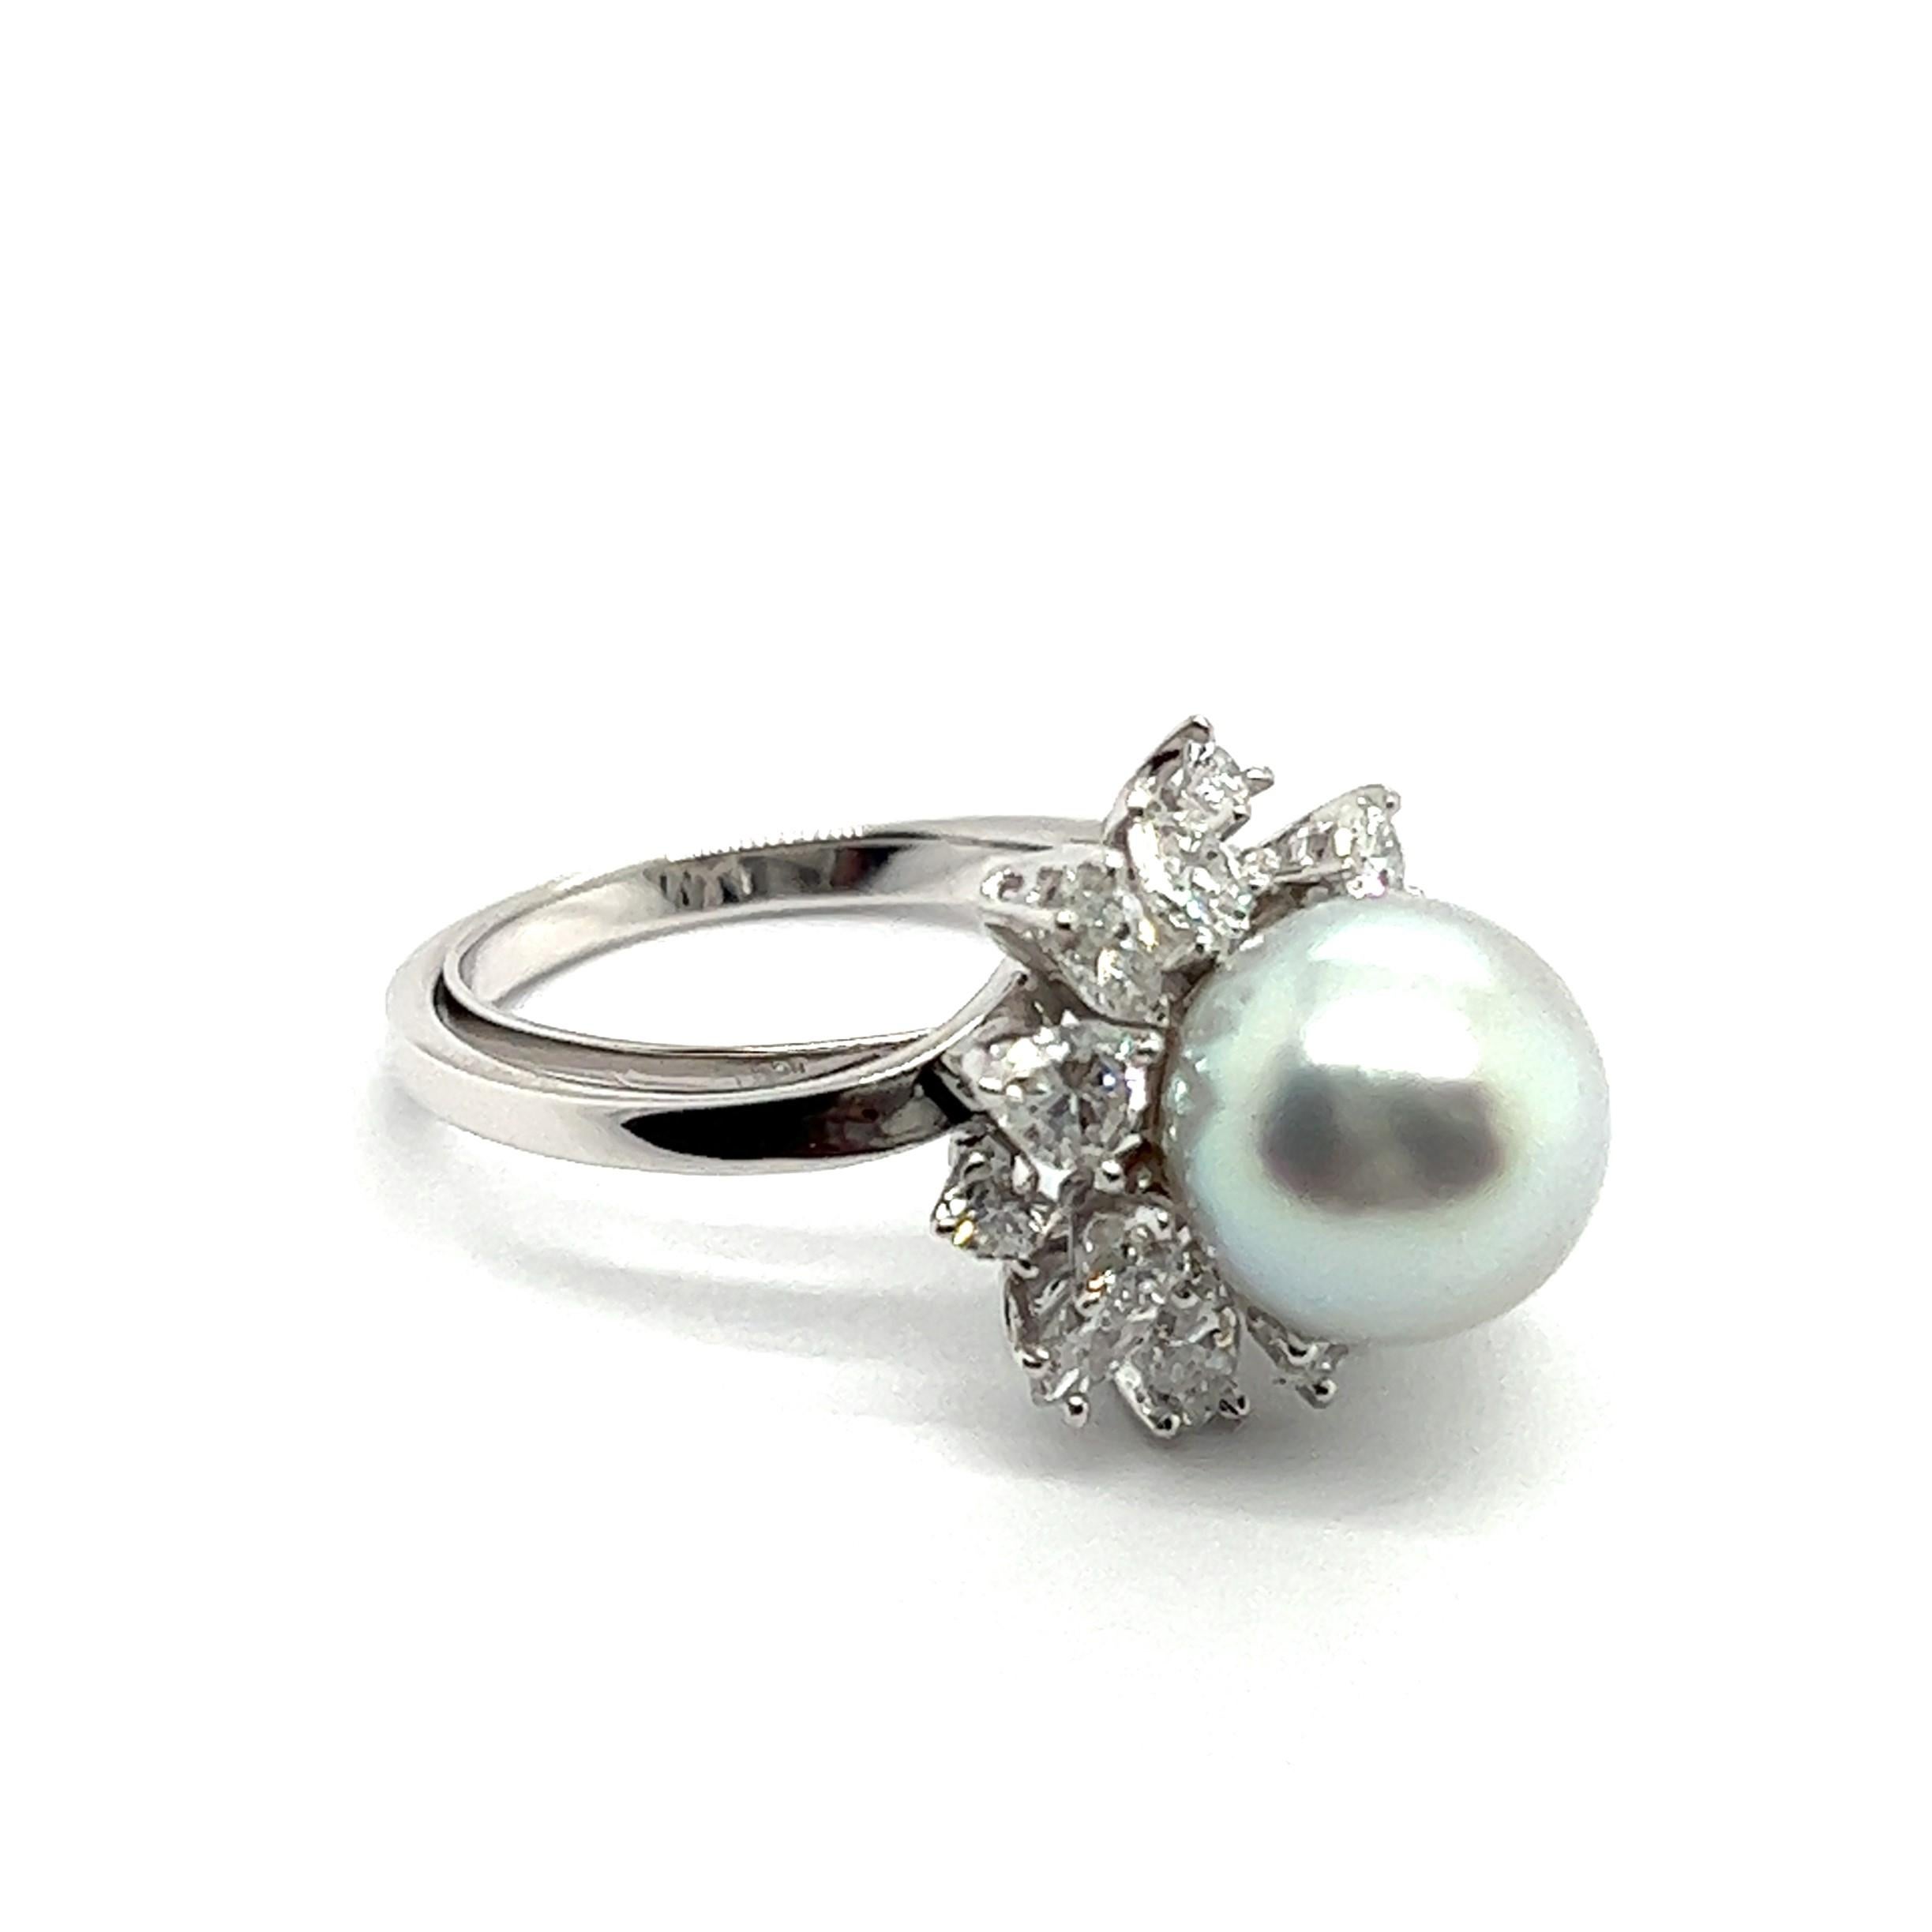 Ring with South Sea Pearl and Diamonds in 18 Karat White Gold by Meister For Sale 4